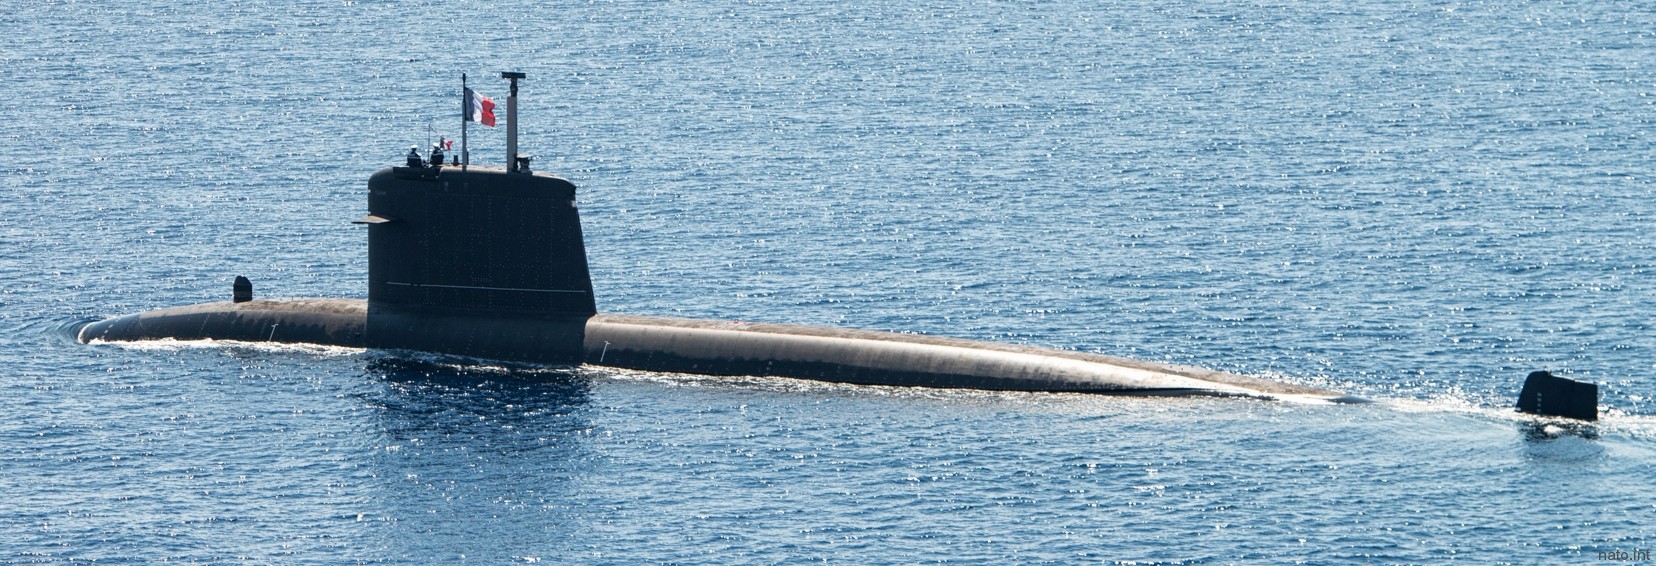 s-606 perle rubis class attack submarine ssn french navy marine nationale sna 06